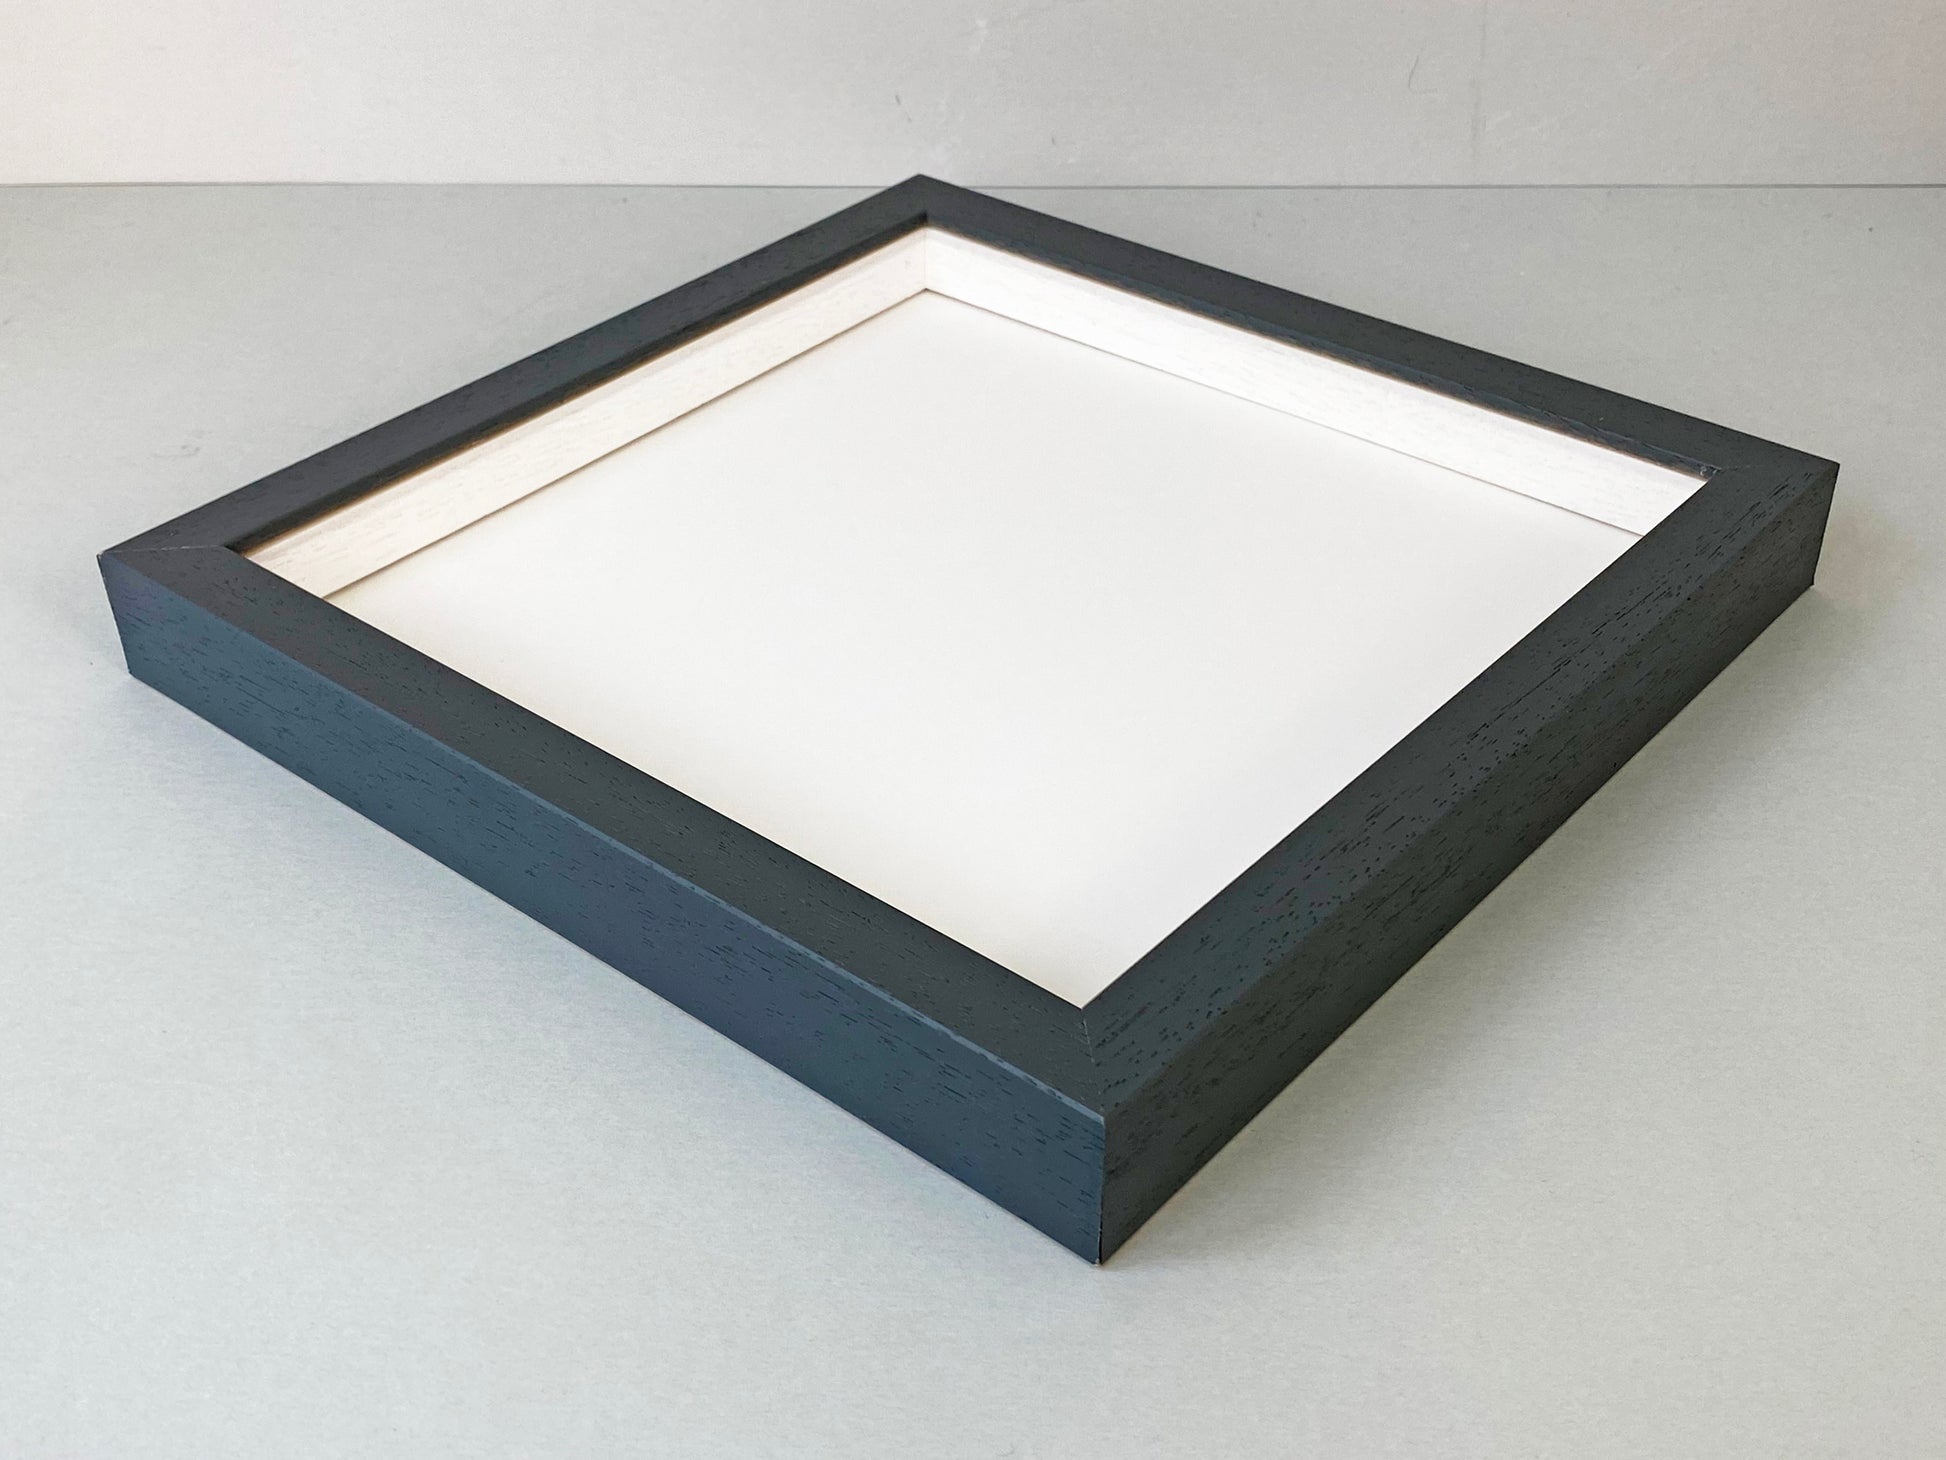 Made To Measure - Box/Craft Frames - 18mm deep. - PhotoFramesandMore - Wooden Picture Frames